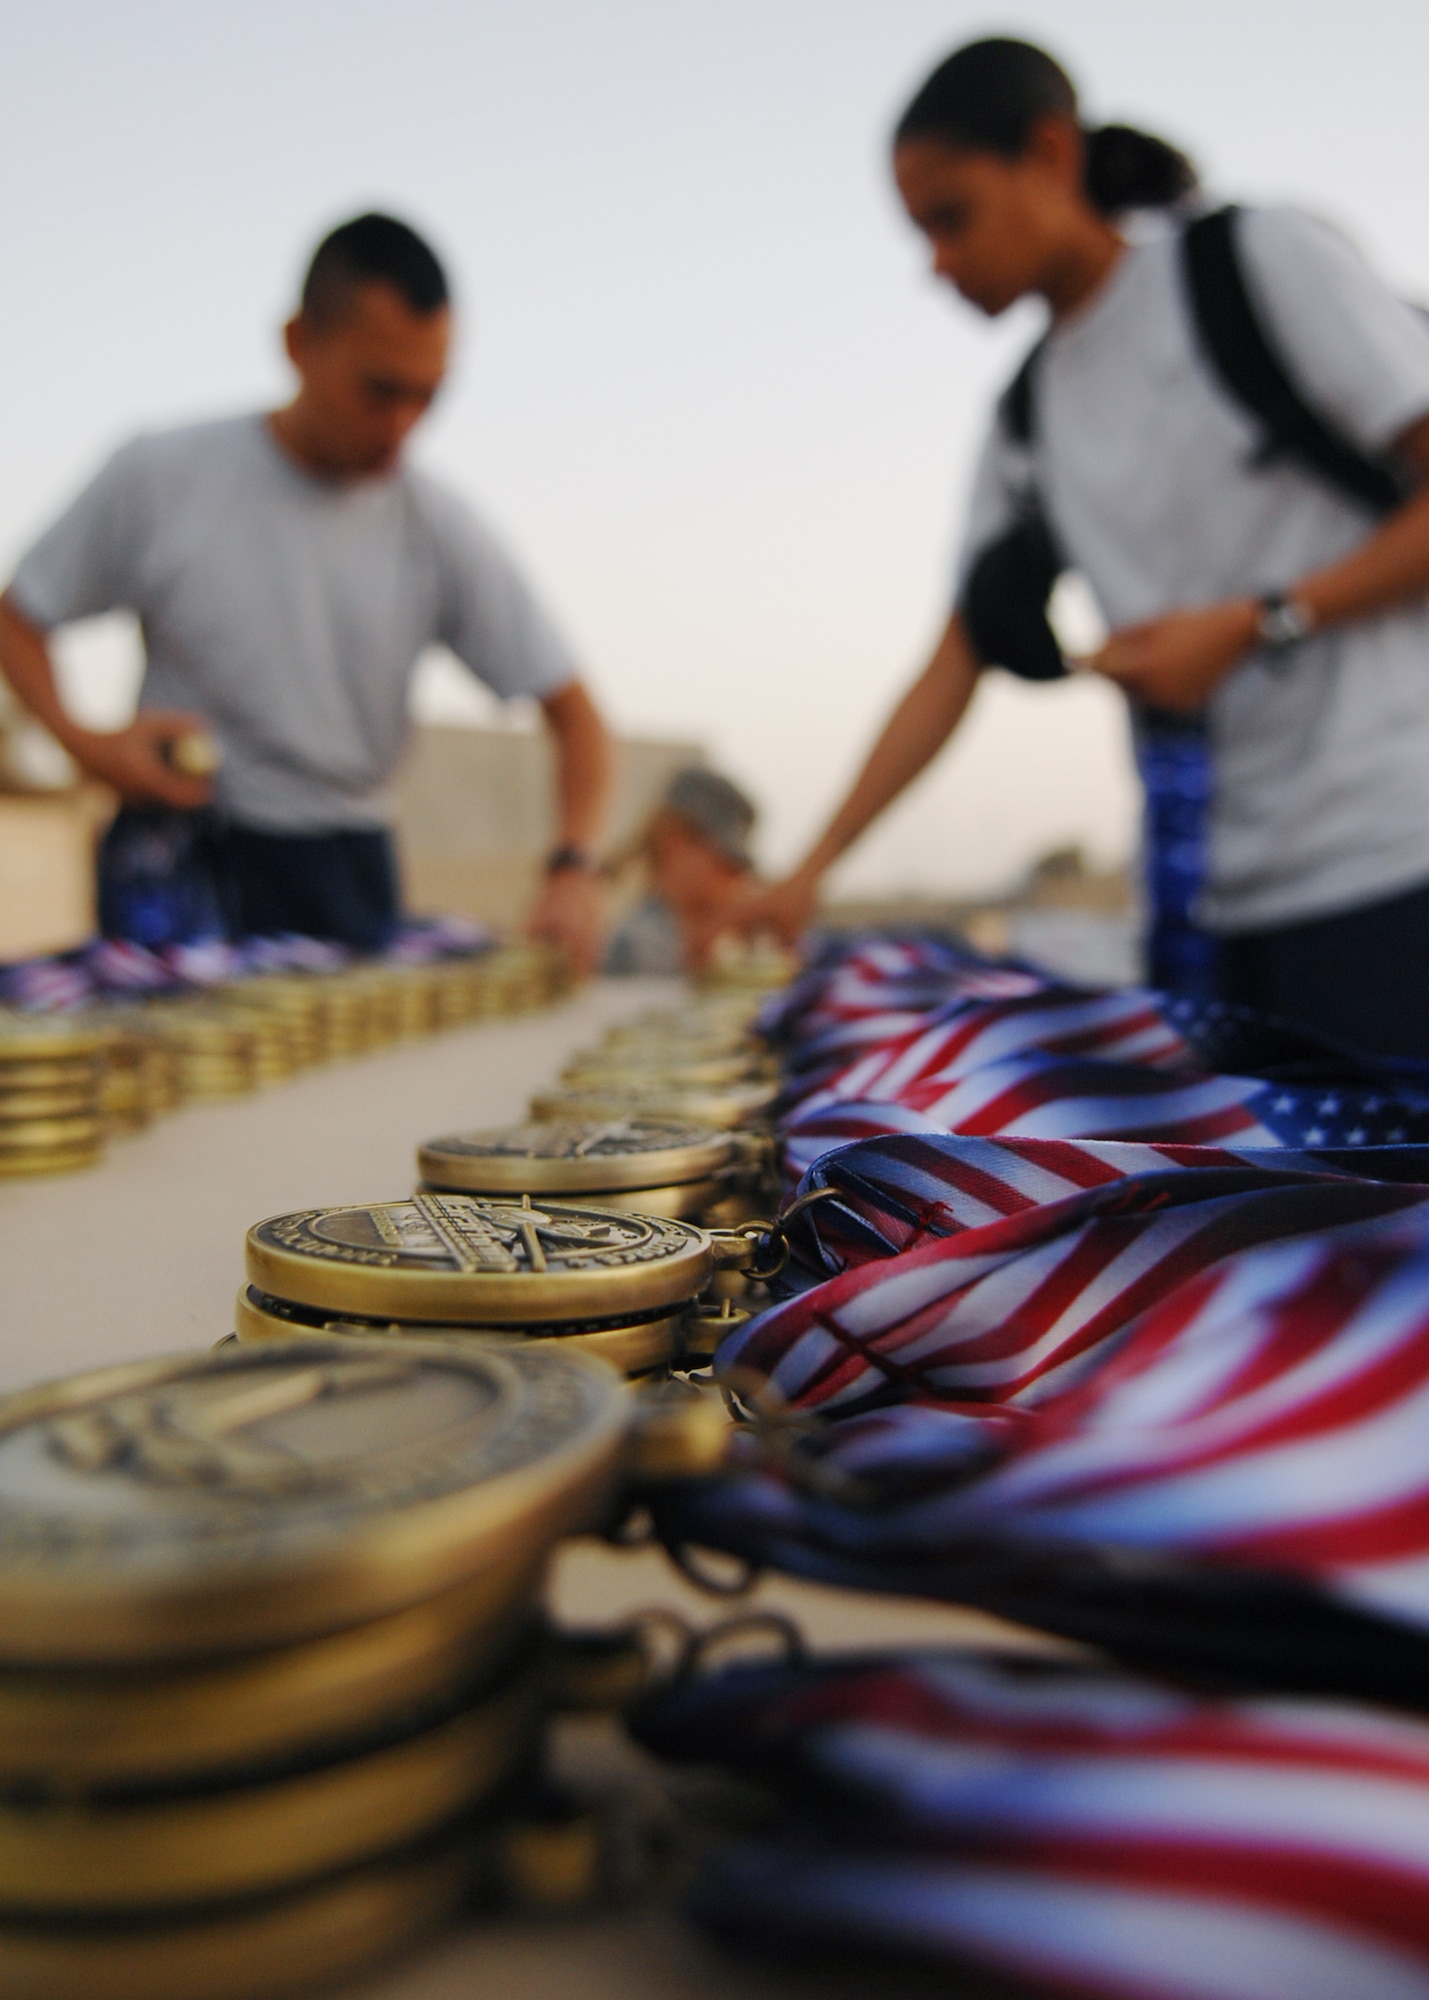 JOINT BASE BALAD, Iraq - Volunteers place medals on a table for participants in the Air Force Half Marathon at Holt Stadium here Sept. 11, 2009. The half marathon at JBB was one of four held at various bases in the AOR that is an officially-sanctioned part of the Air Force Half Marathon to be held Sept. 19, 2009, at Wright Patterson Air Force Base.  (U.S. Air Force photo/Senior Airman Christopher Hubenthal)